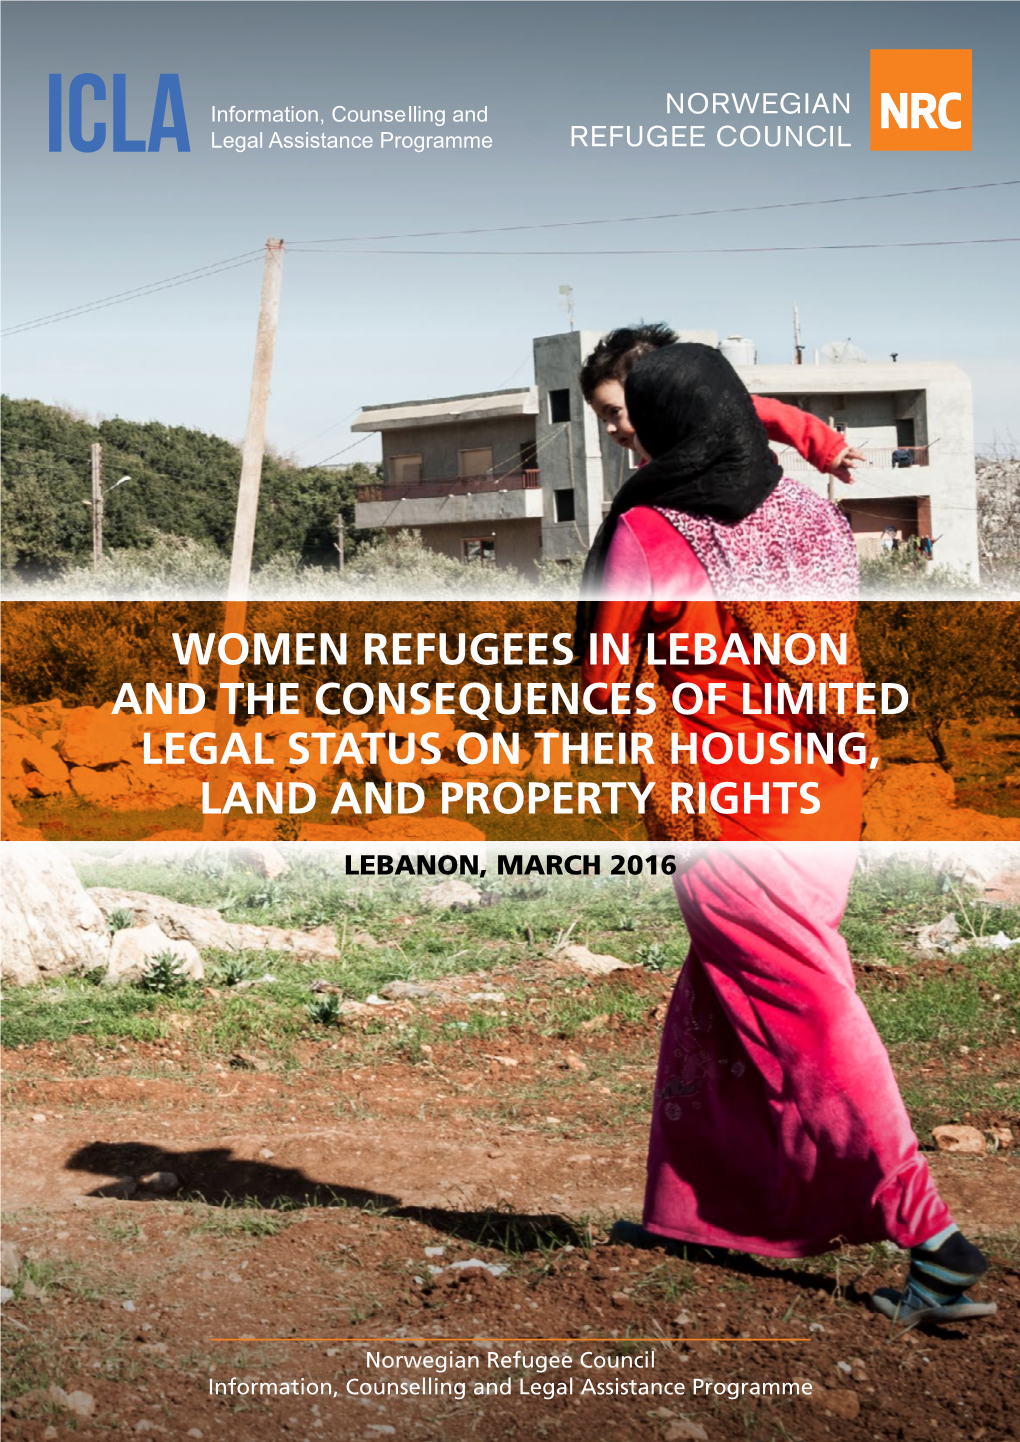 Women Refugees in Lebanon and the Consequences of Limited Legal Status on Their Housing, Land and Property Rights